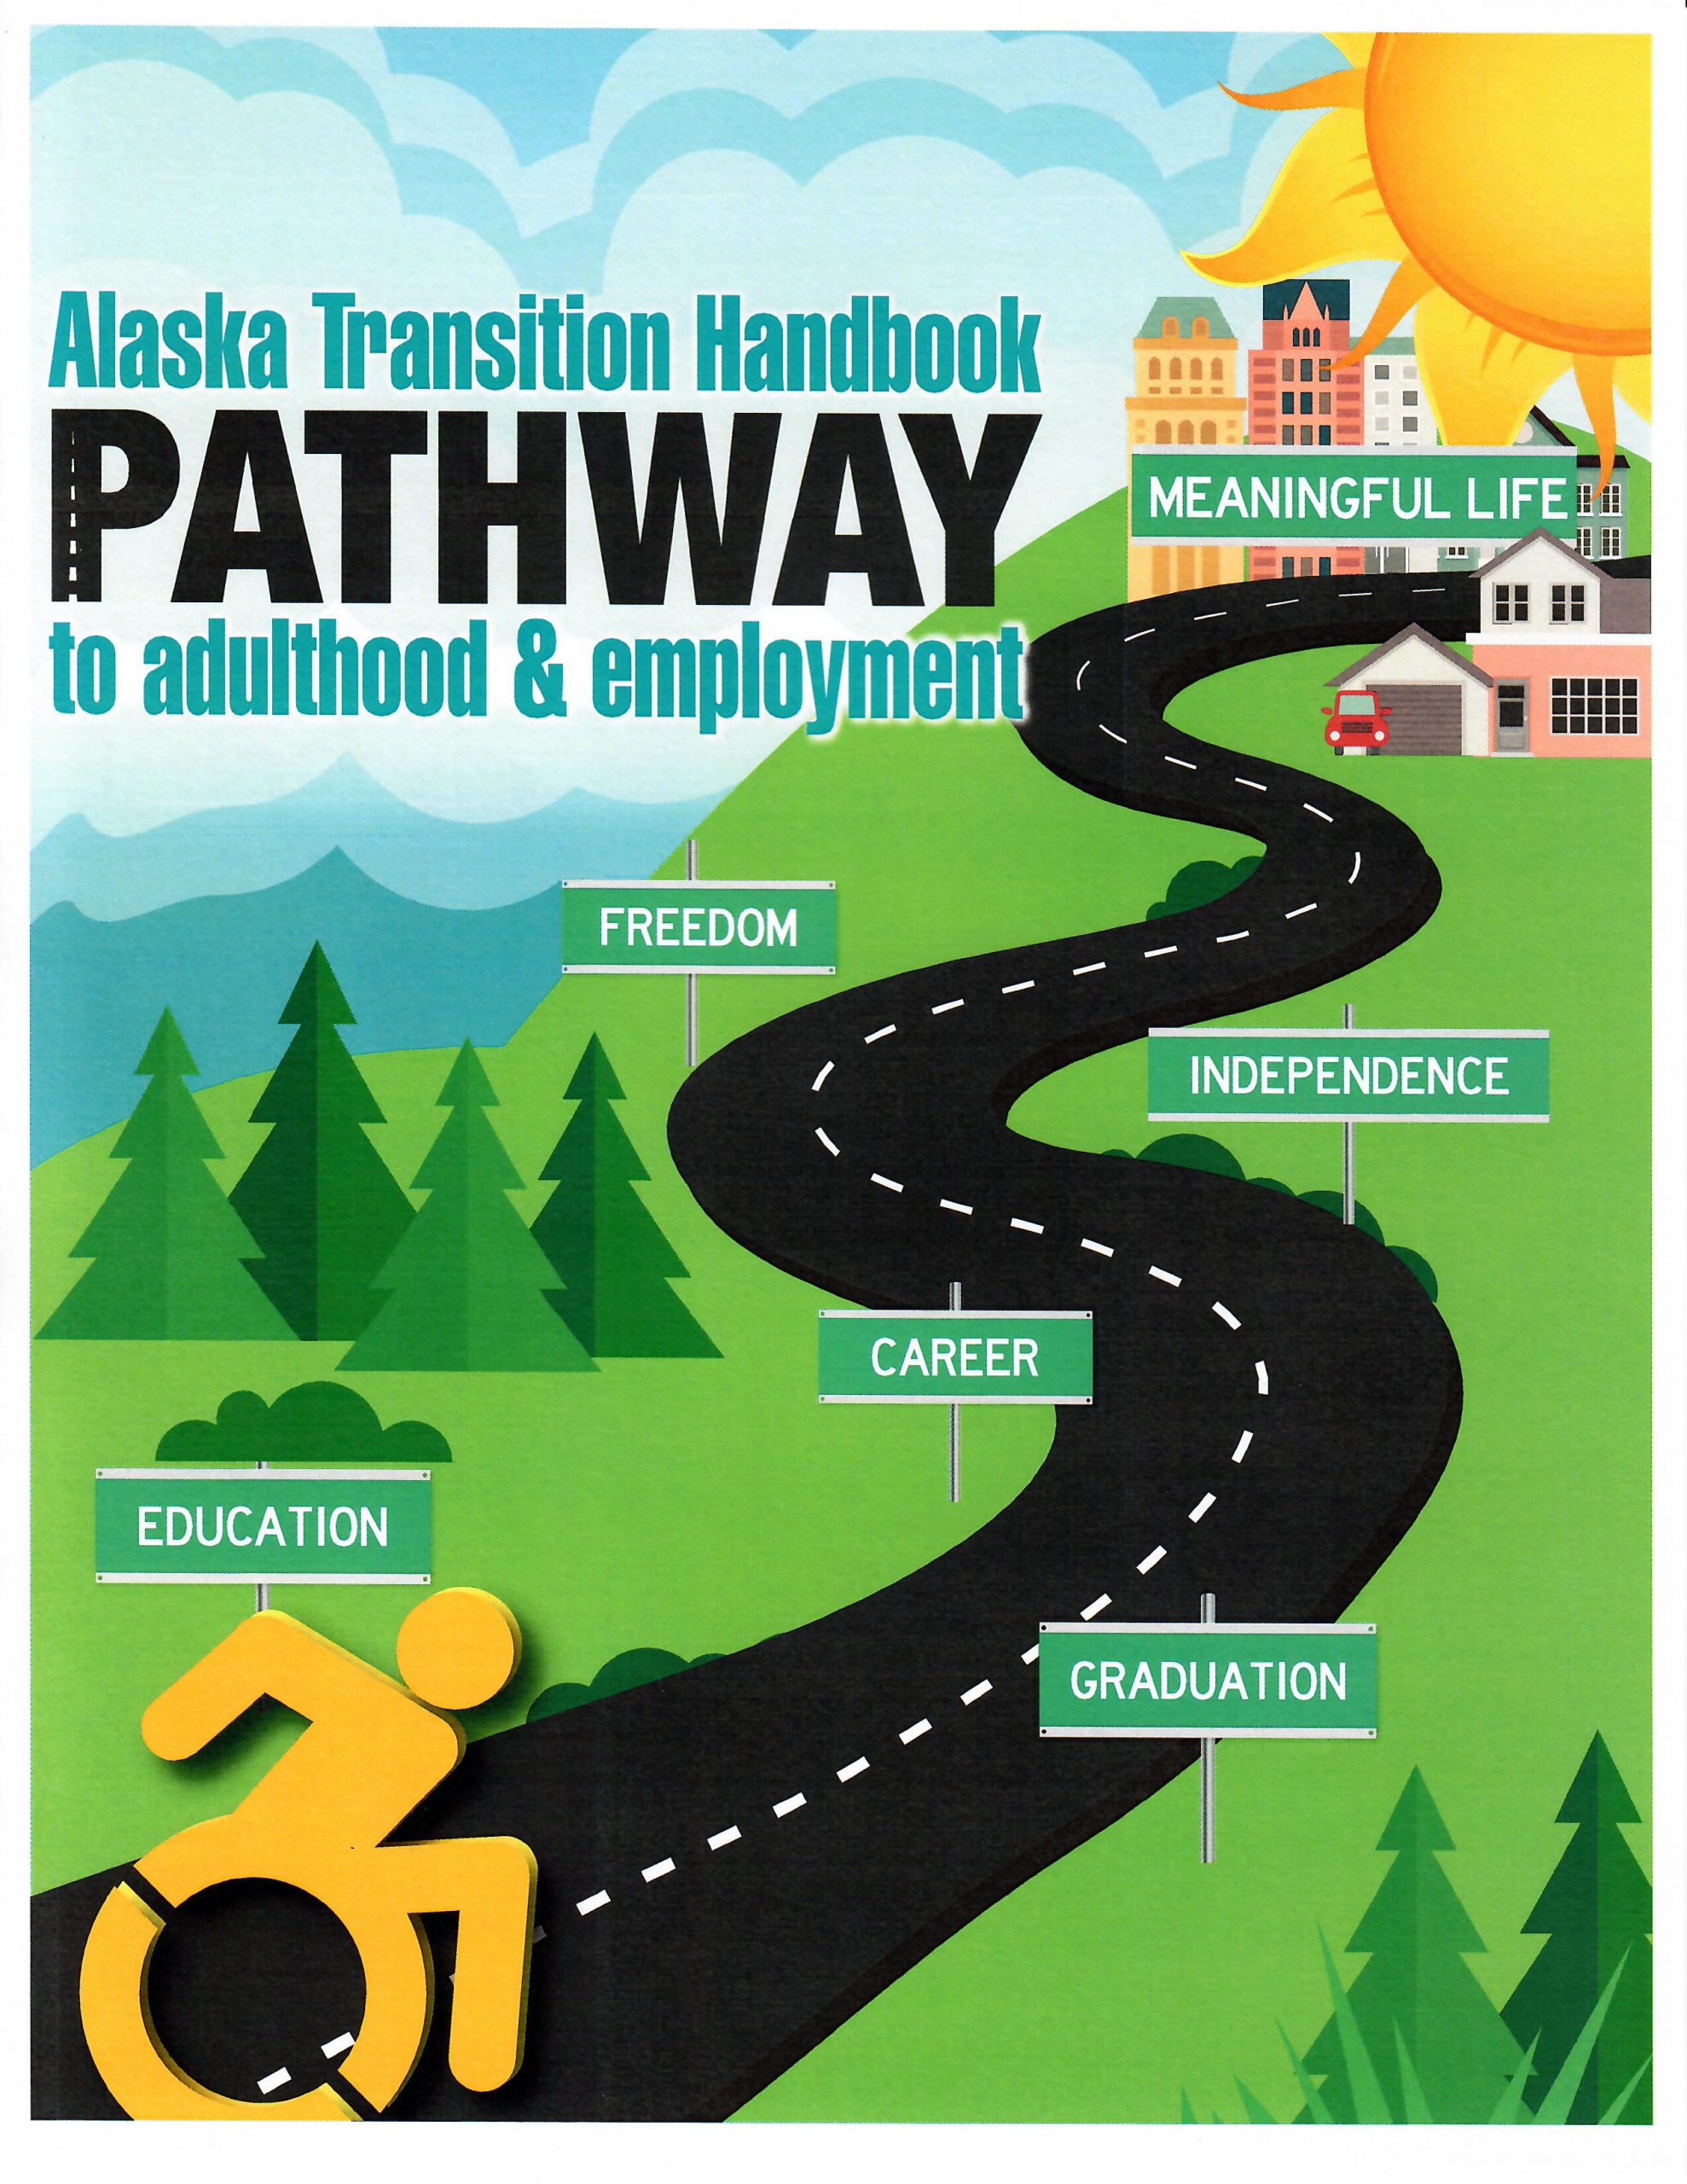 Alaska Transition Handbook, Pathway to adulthood & employment cover page